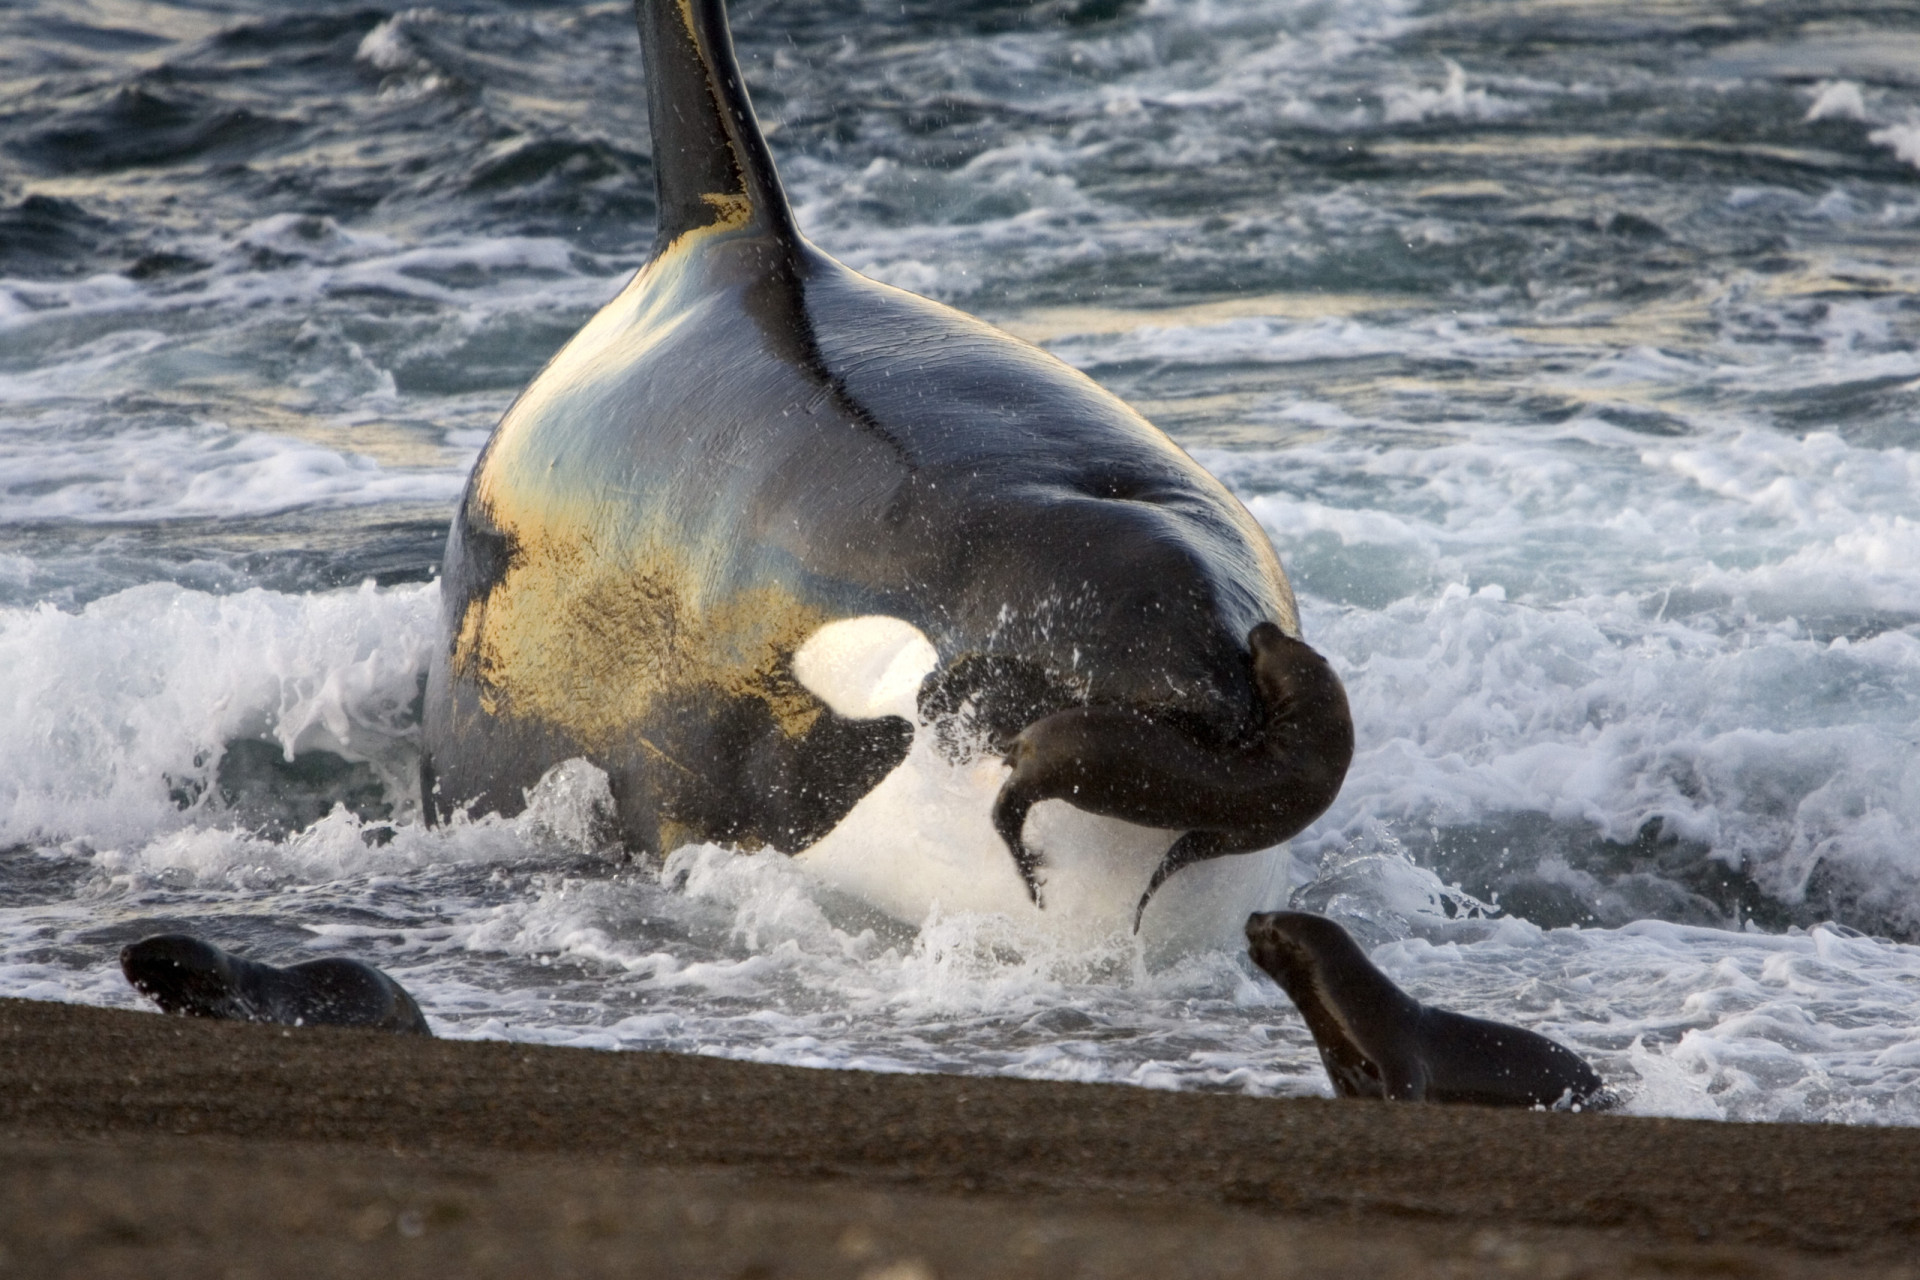 <p>BBC Earth's Steve Backshall caught a pod of orcas swimming up onto shore to snatch a baby seal from the sand—a move that is actually very dangerous and requires a lot of effort for them because at 5,000-6,000 lbs they risk being beached. But for all that effort surely they're getting precious food, right? Wrong.</p><p><a href="https://www.msn.com/en-us/community/channel/vid-7xx8mnucu55yw63we9va2gwr7uihbxwc68fxqp25x6tg4ftibpra?cvid=94631541bc0f4f89bfd59158d696ad7e">Follow us and access great exclusive content every day</a></p>